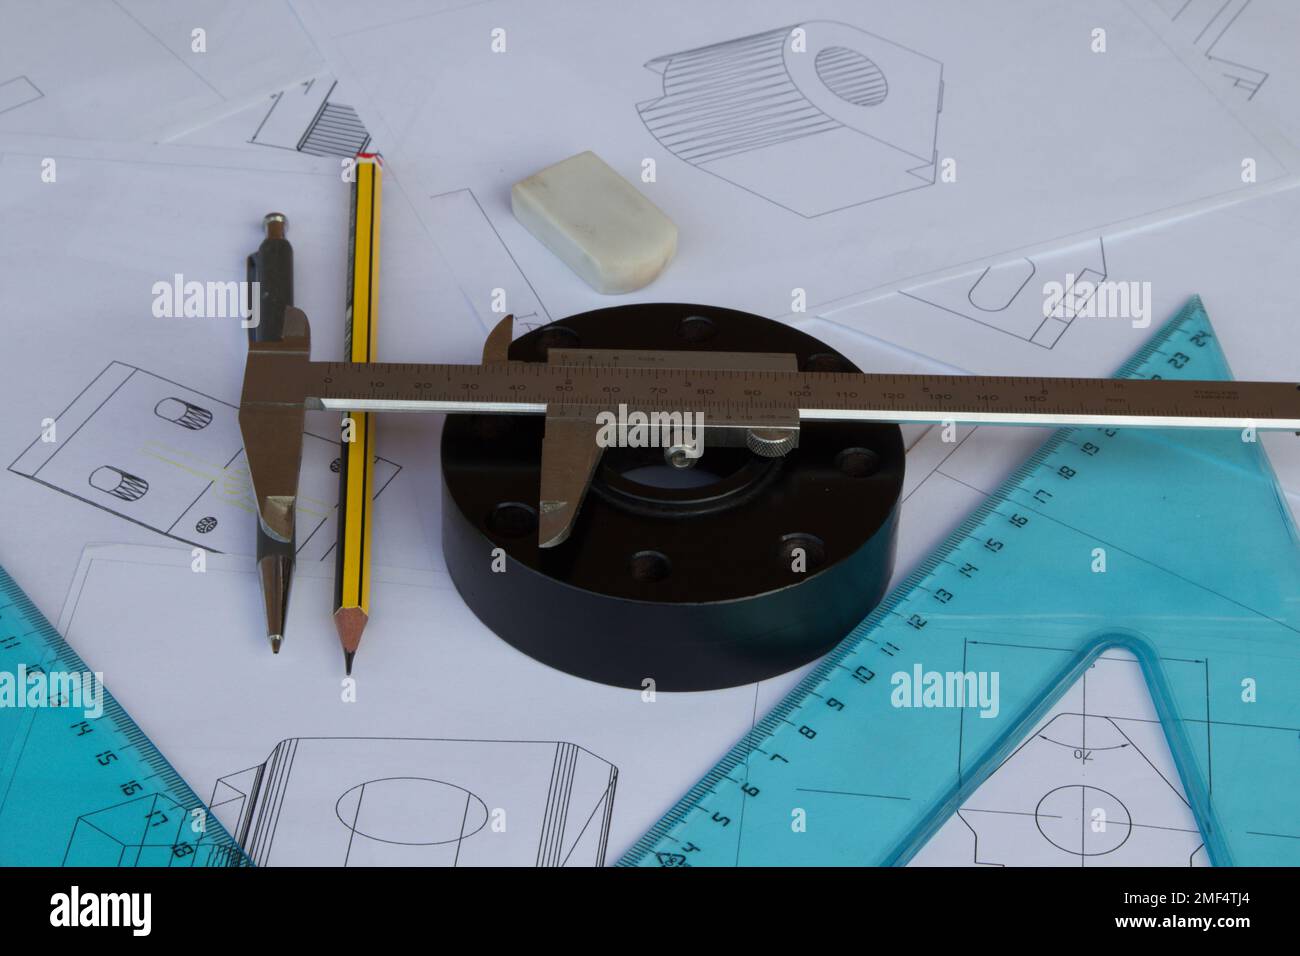 Image of a mechanical part and a precision measuring caliper resting on blueprints. Mechanical engineering works and drawings. Stock Photo